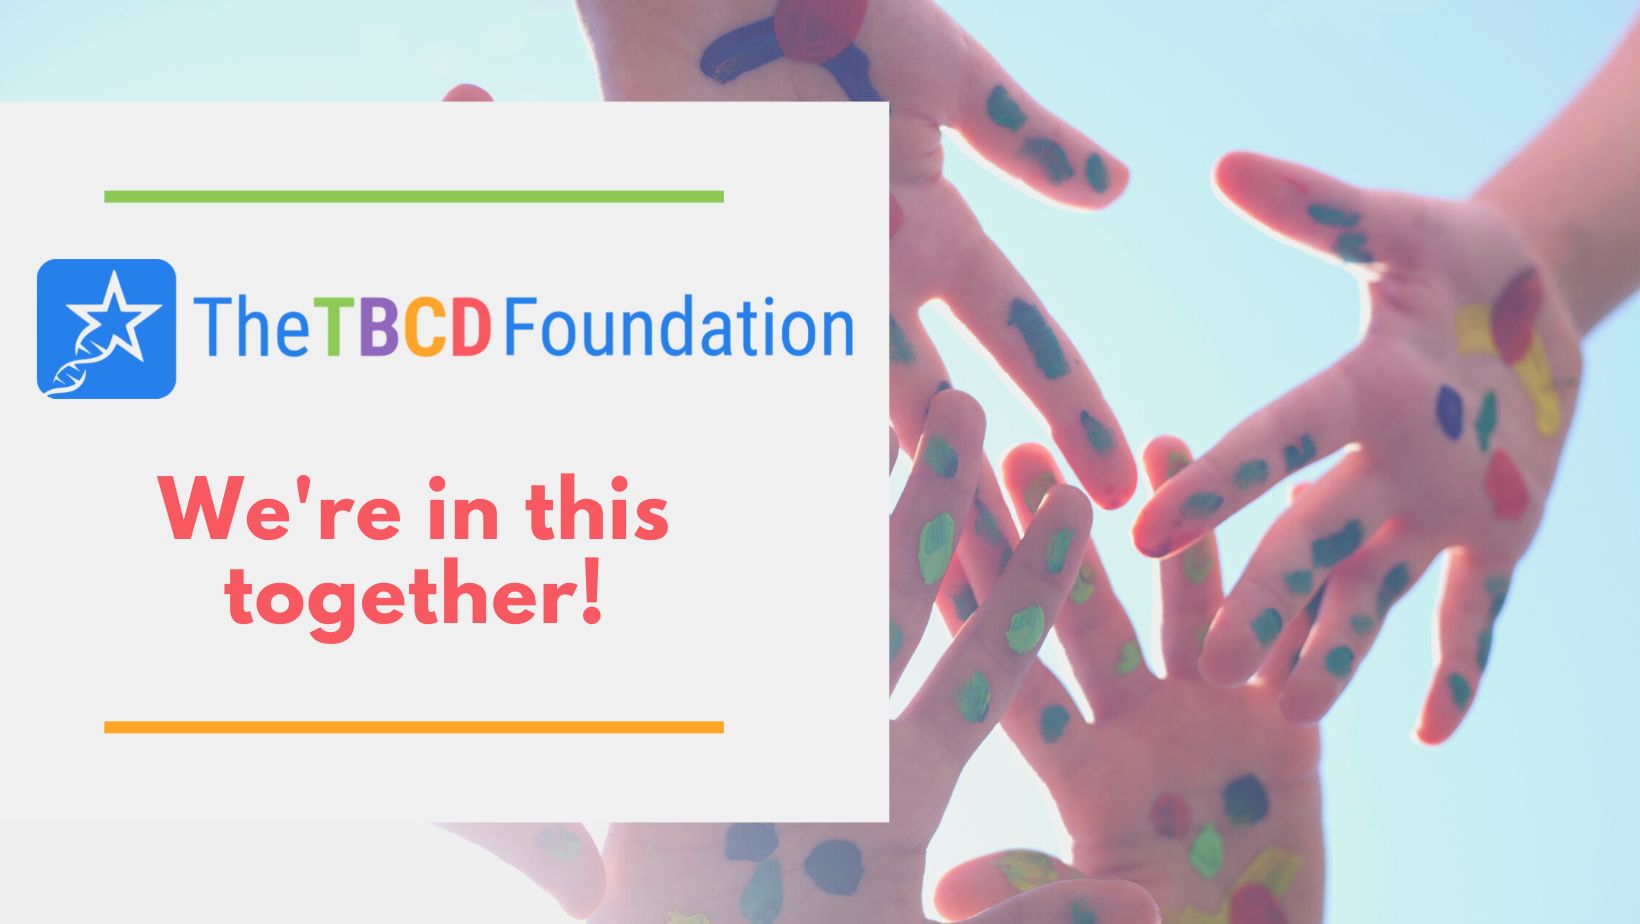 The TBCD Foundation - we're all in this together.